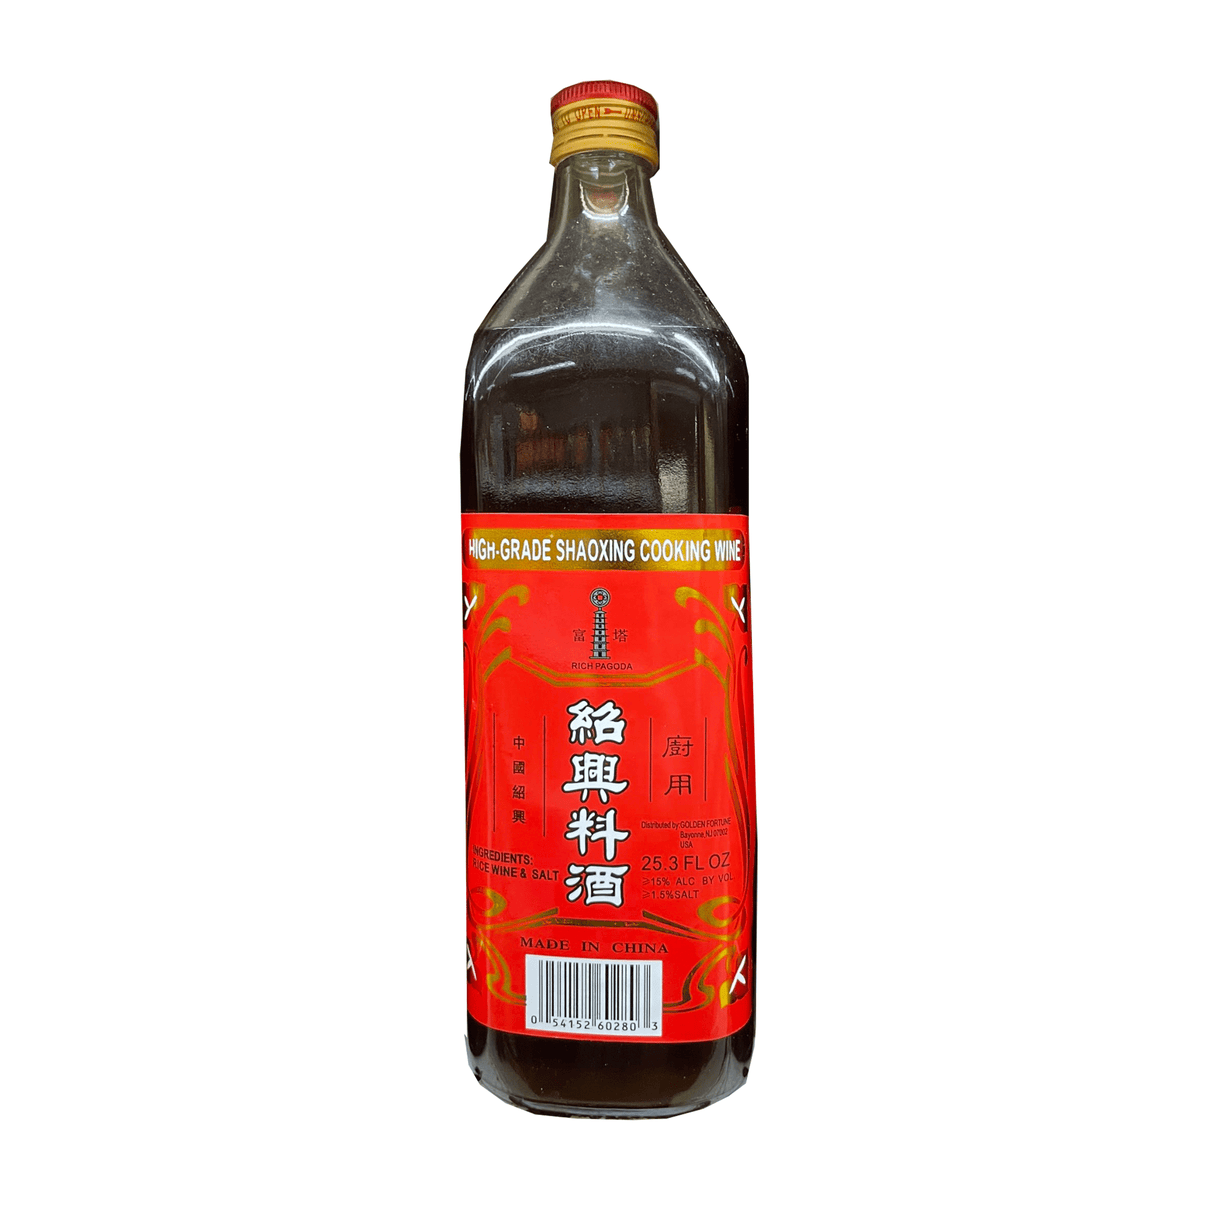 Rich Pagoda High-Grade Shaoxing Cooking Wine